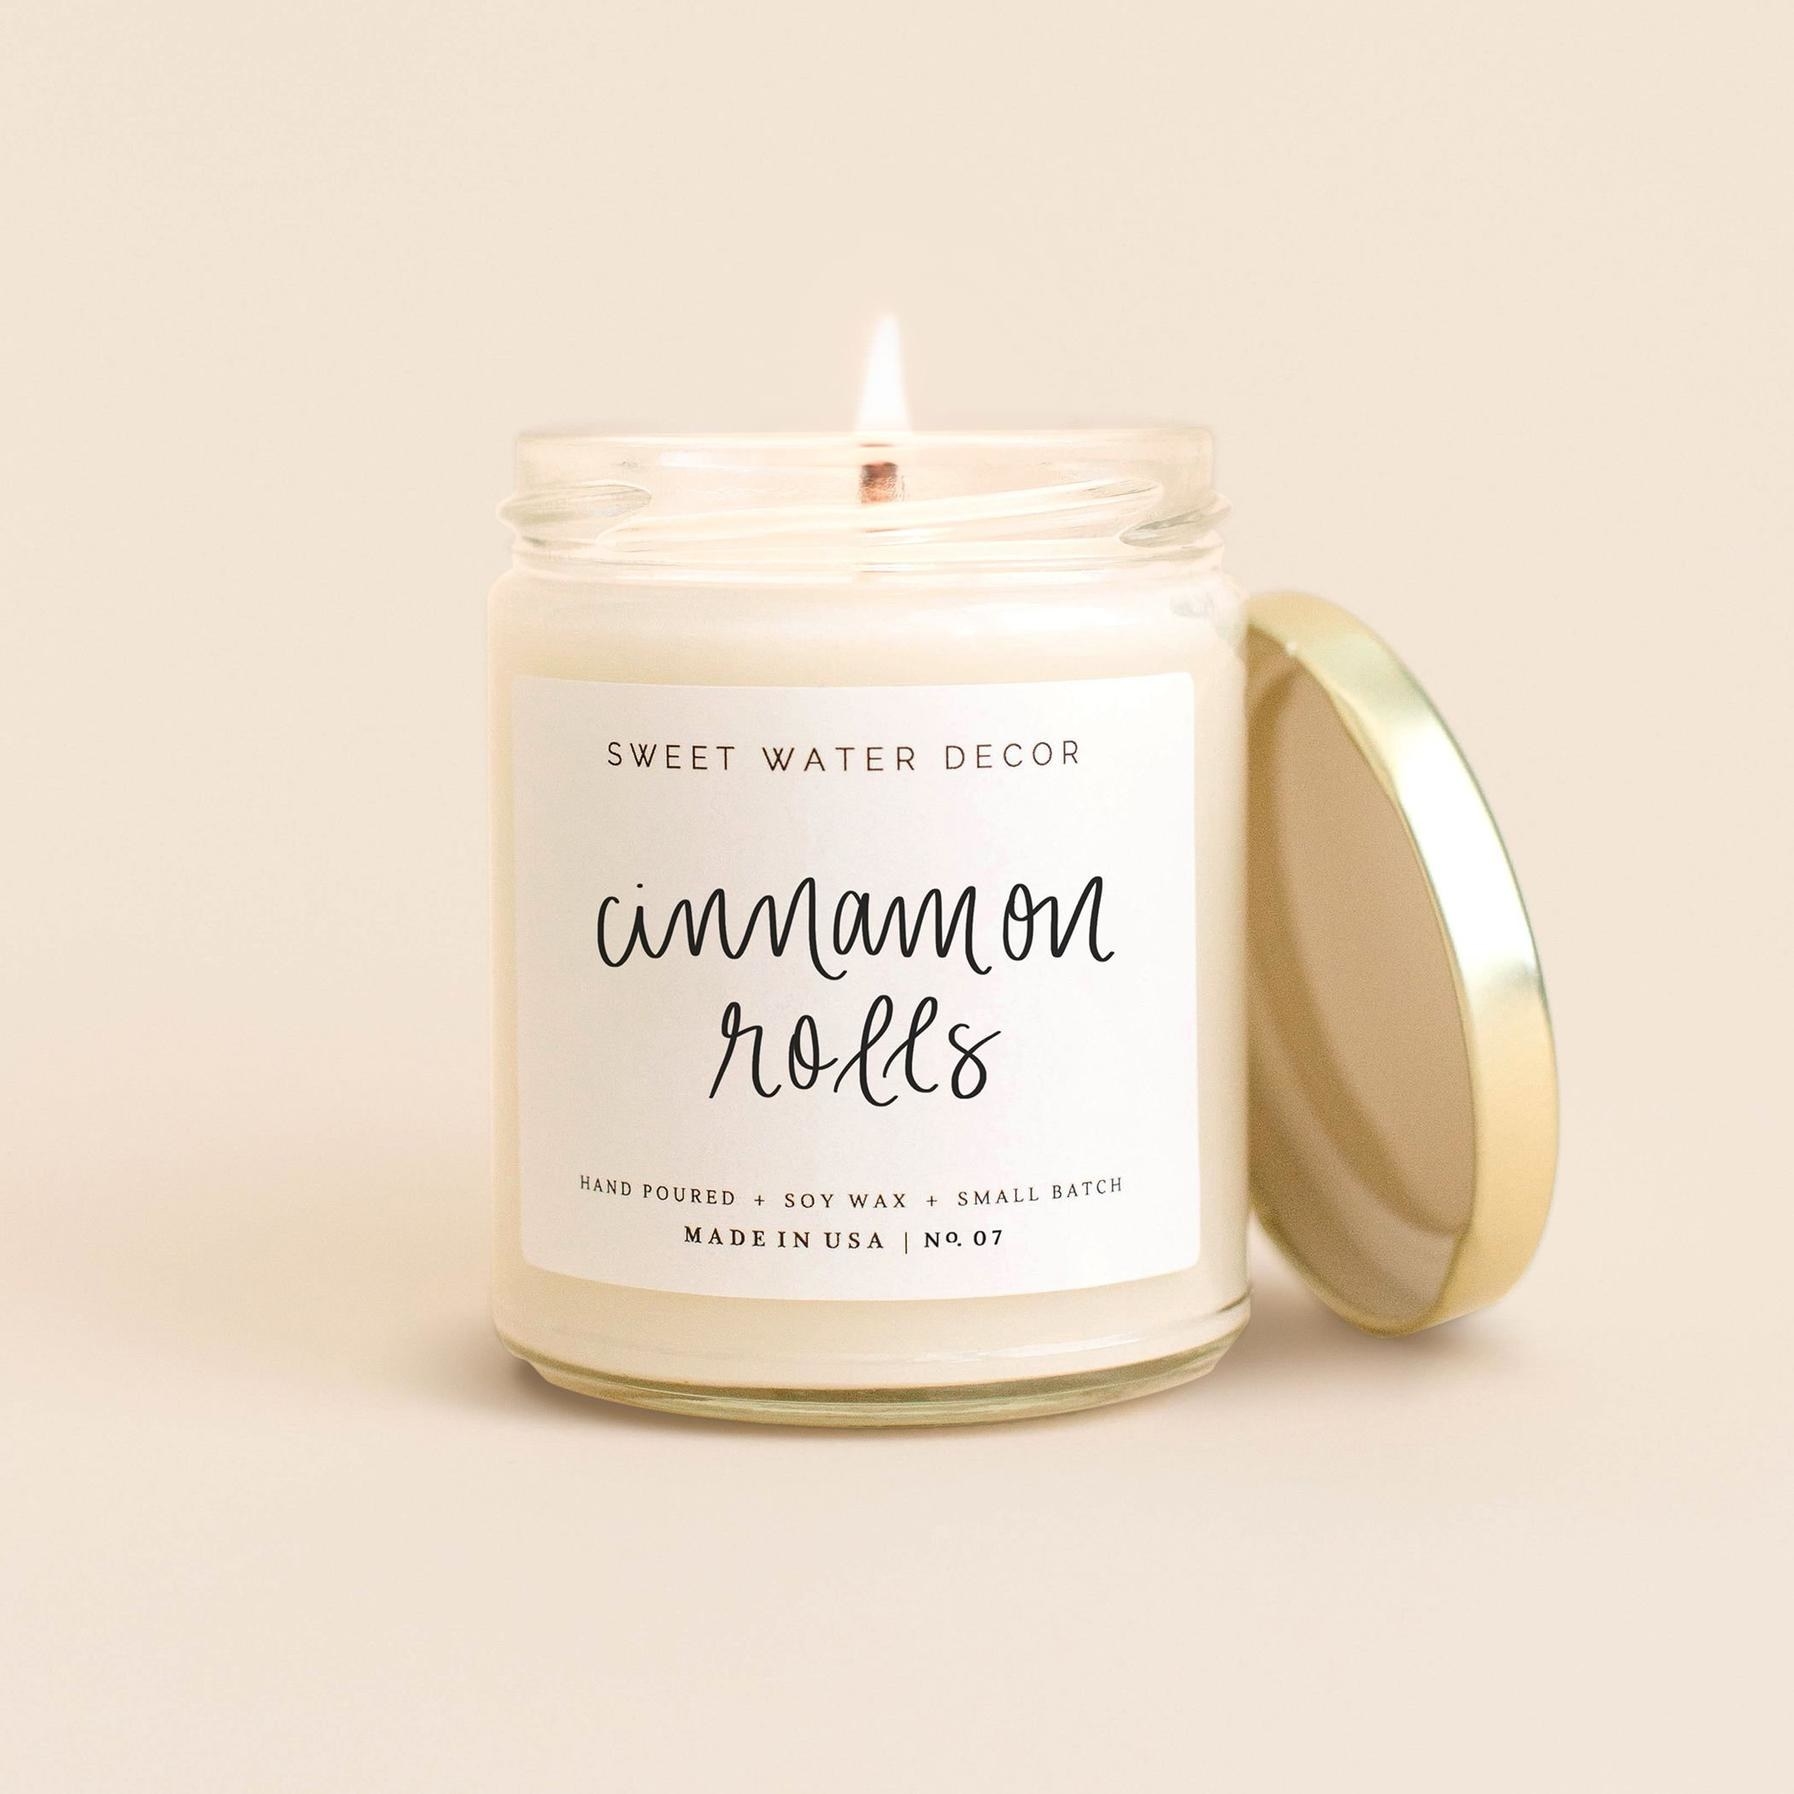 The all-white cinnamon roll candle lit in front of a neutral background